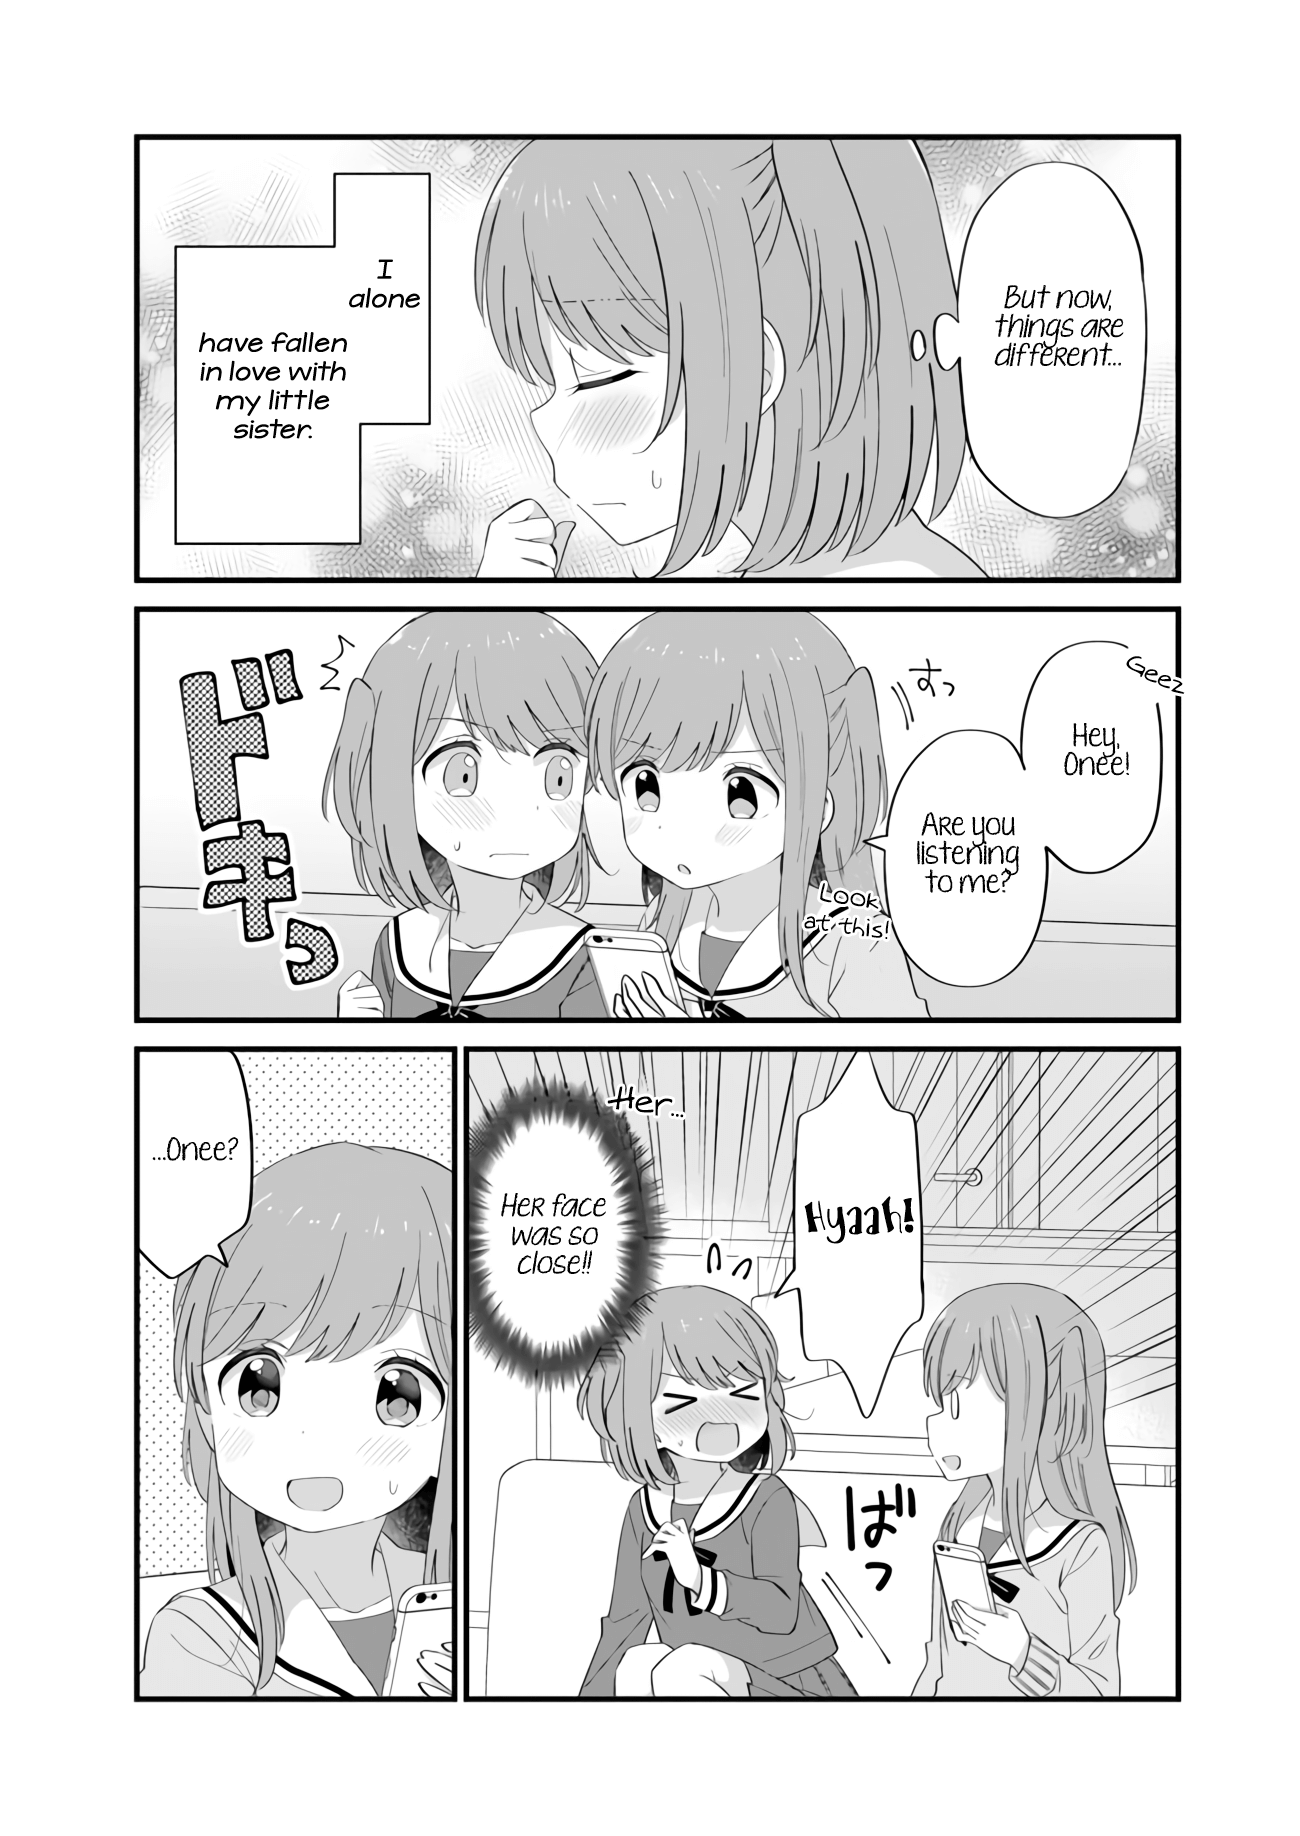 Mutually Unrequited Twin Sisters - Page 2